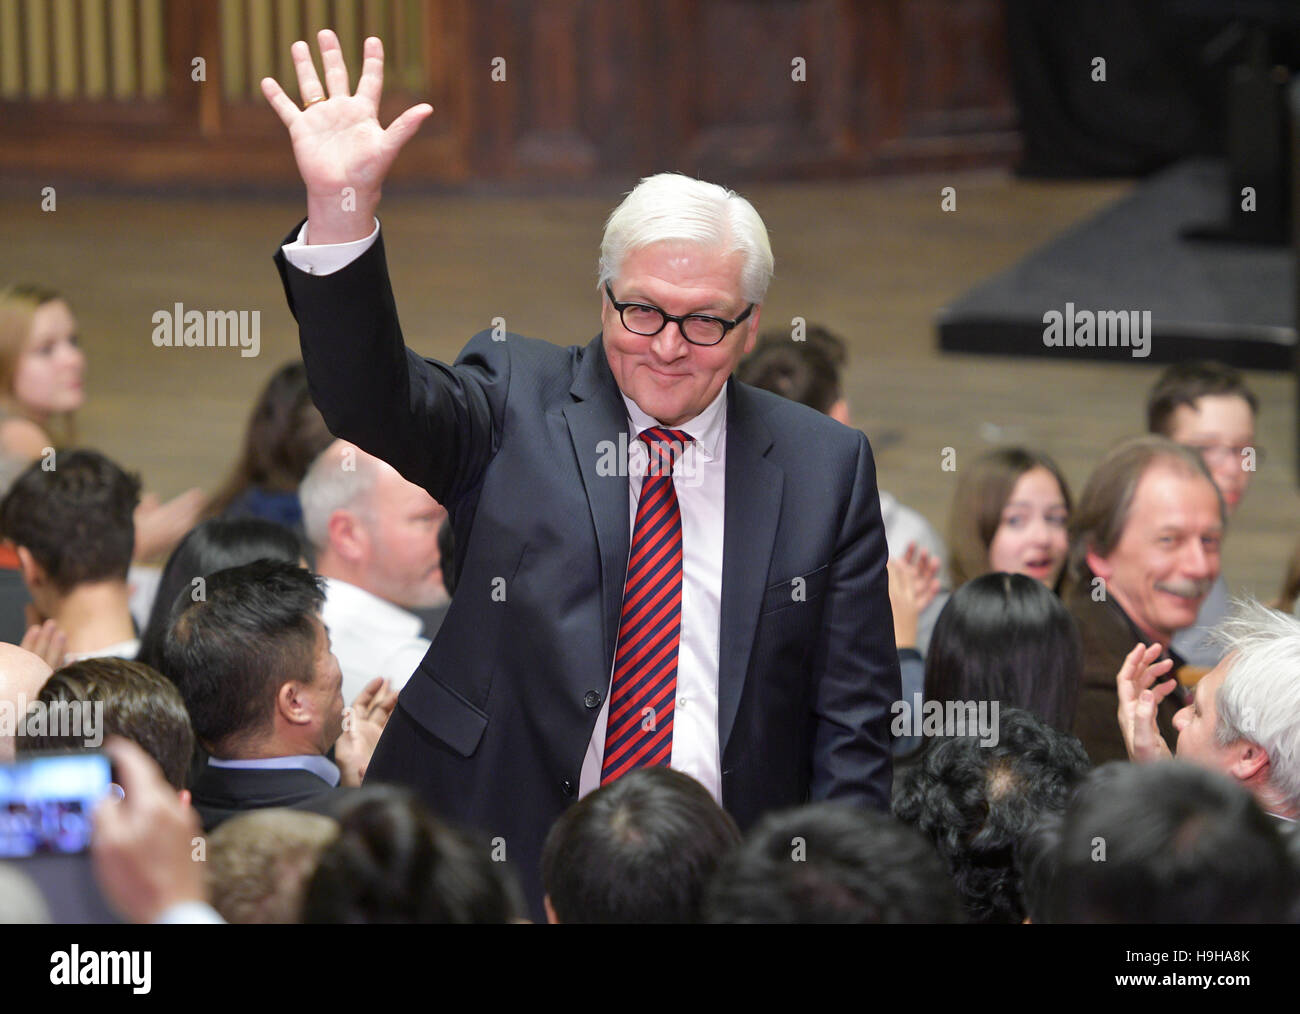 Hamburg, Germany. 24th Nov, 2016. German Foreign Minister Frank-Walter Steinmeier (SPD) waves in lecture hall A of Hamburg University in Hamburg, Germany, 24 November 2016. Steinmeier (SPD) and Chinese Vice Premier Liu Yandong attended the closing event for the Deutsch-Chinesisches Jahr fuer Schueler- und Jugendaustausch (lit. German-Chinese year of pupil and youth exchange.) Photo: Axel Heimken/dpa/Alamy Live News Stock Photo